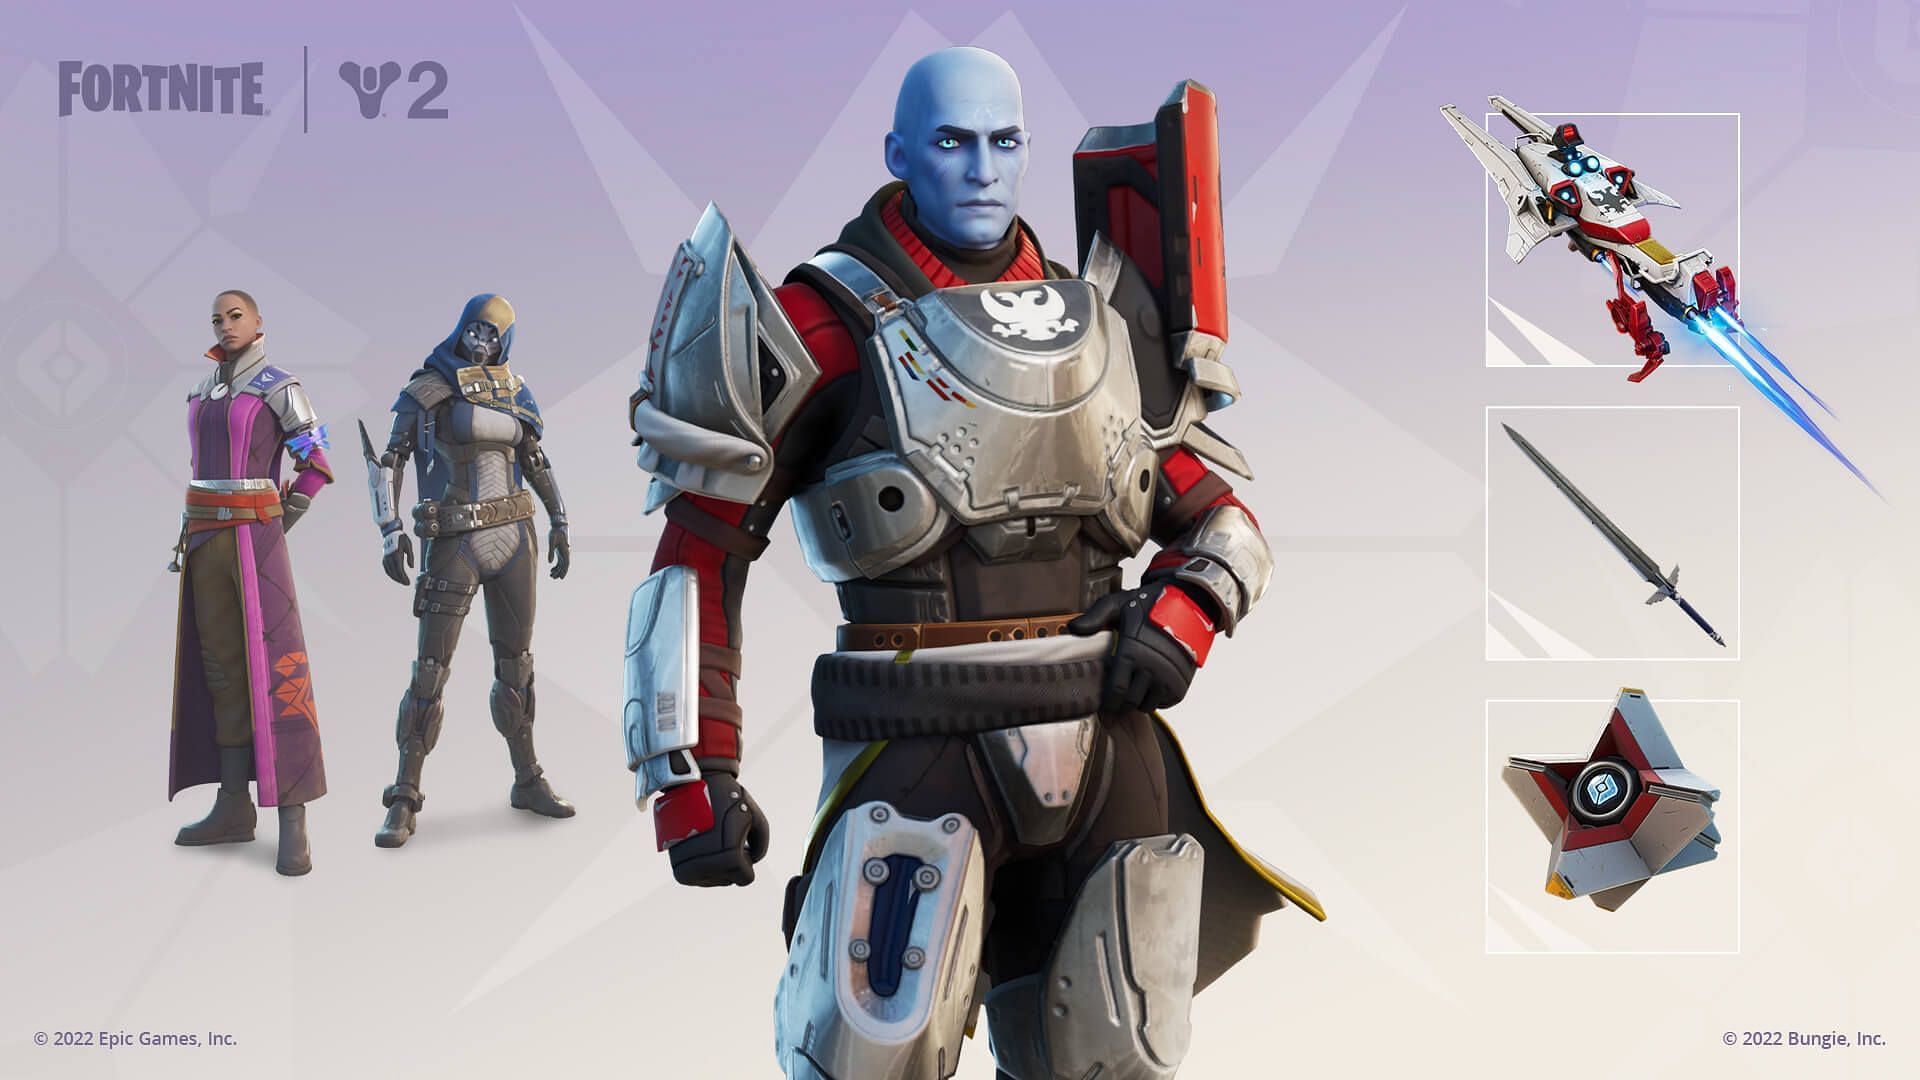 Destiny 2 cosmetic items are coming to Fortnite on August 23 (Image via Epic Games)